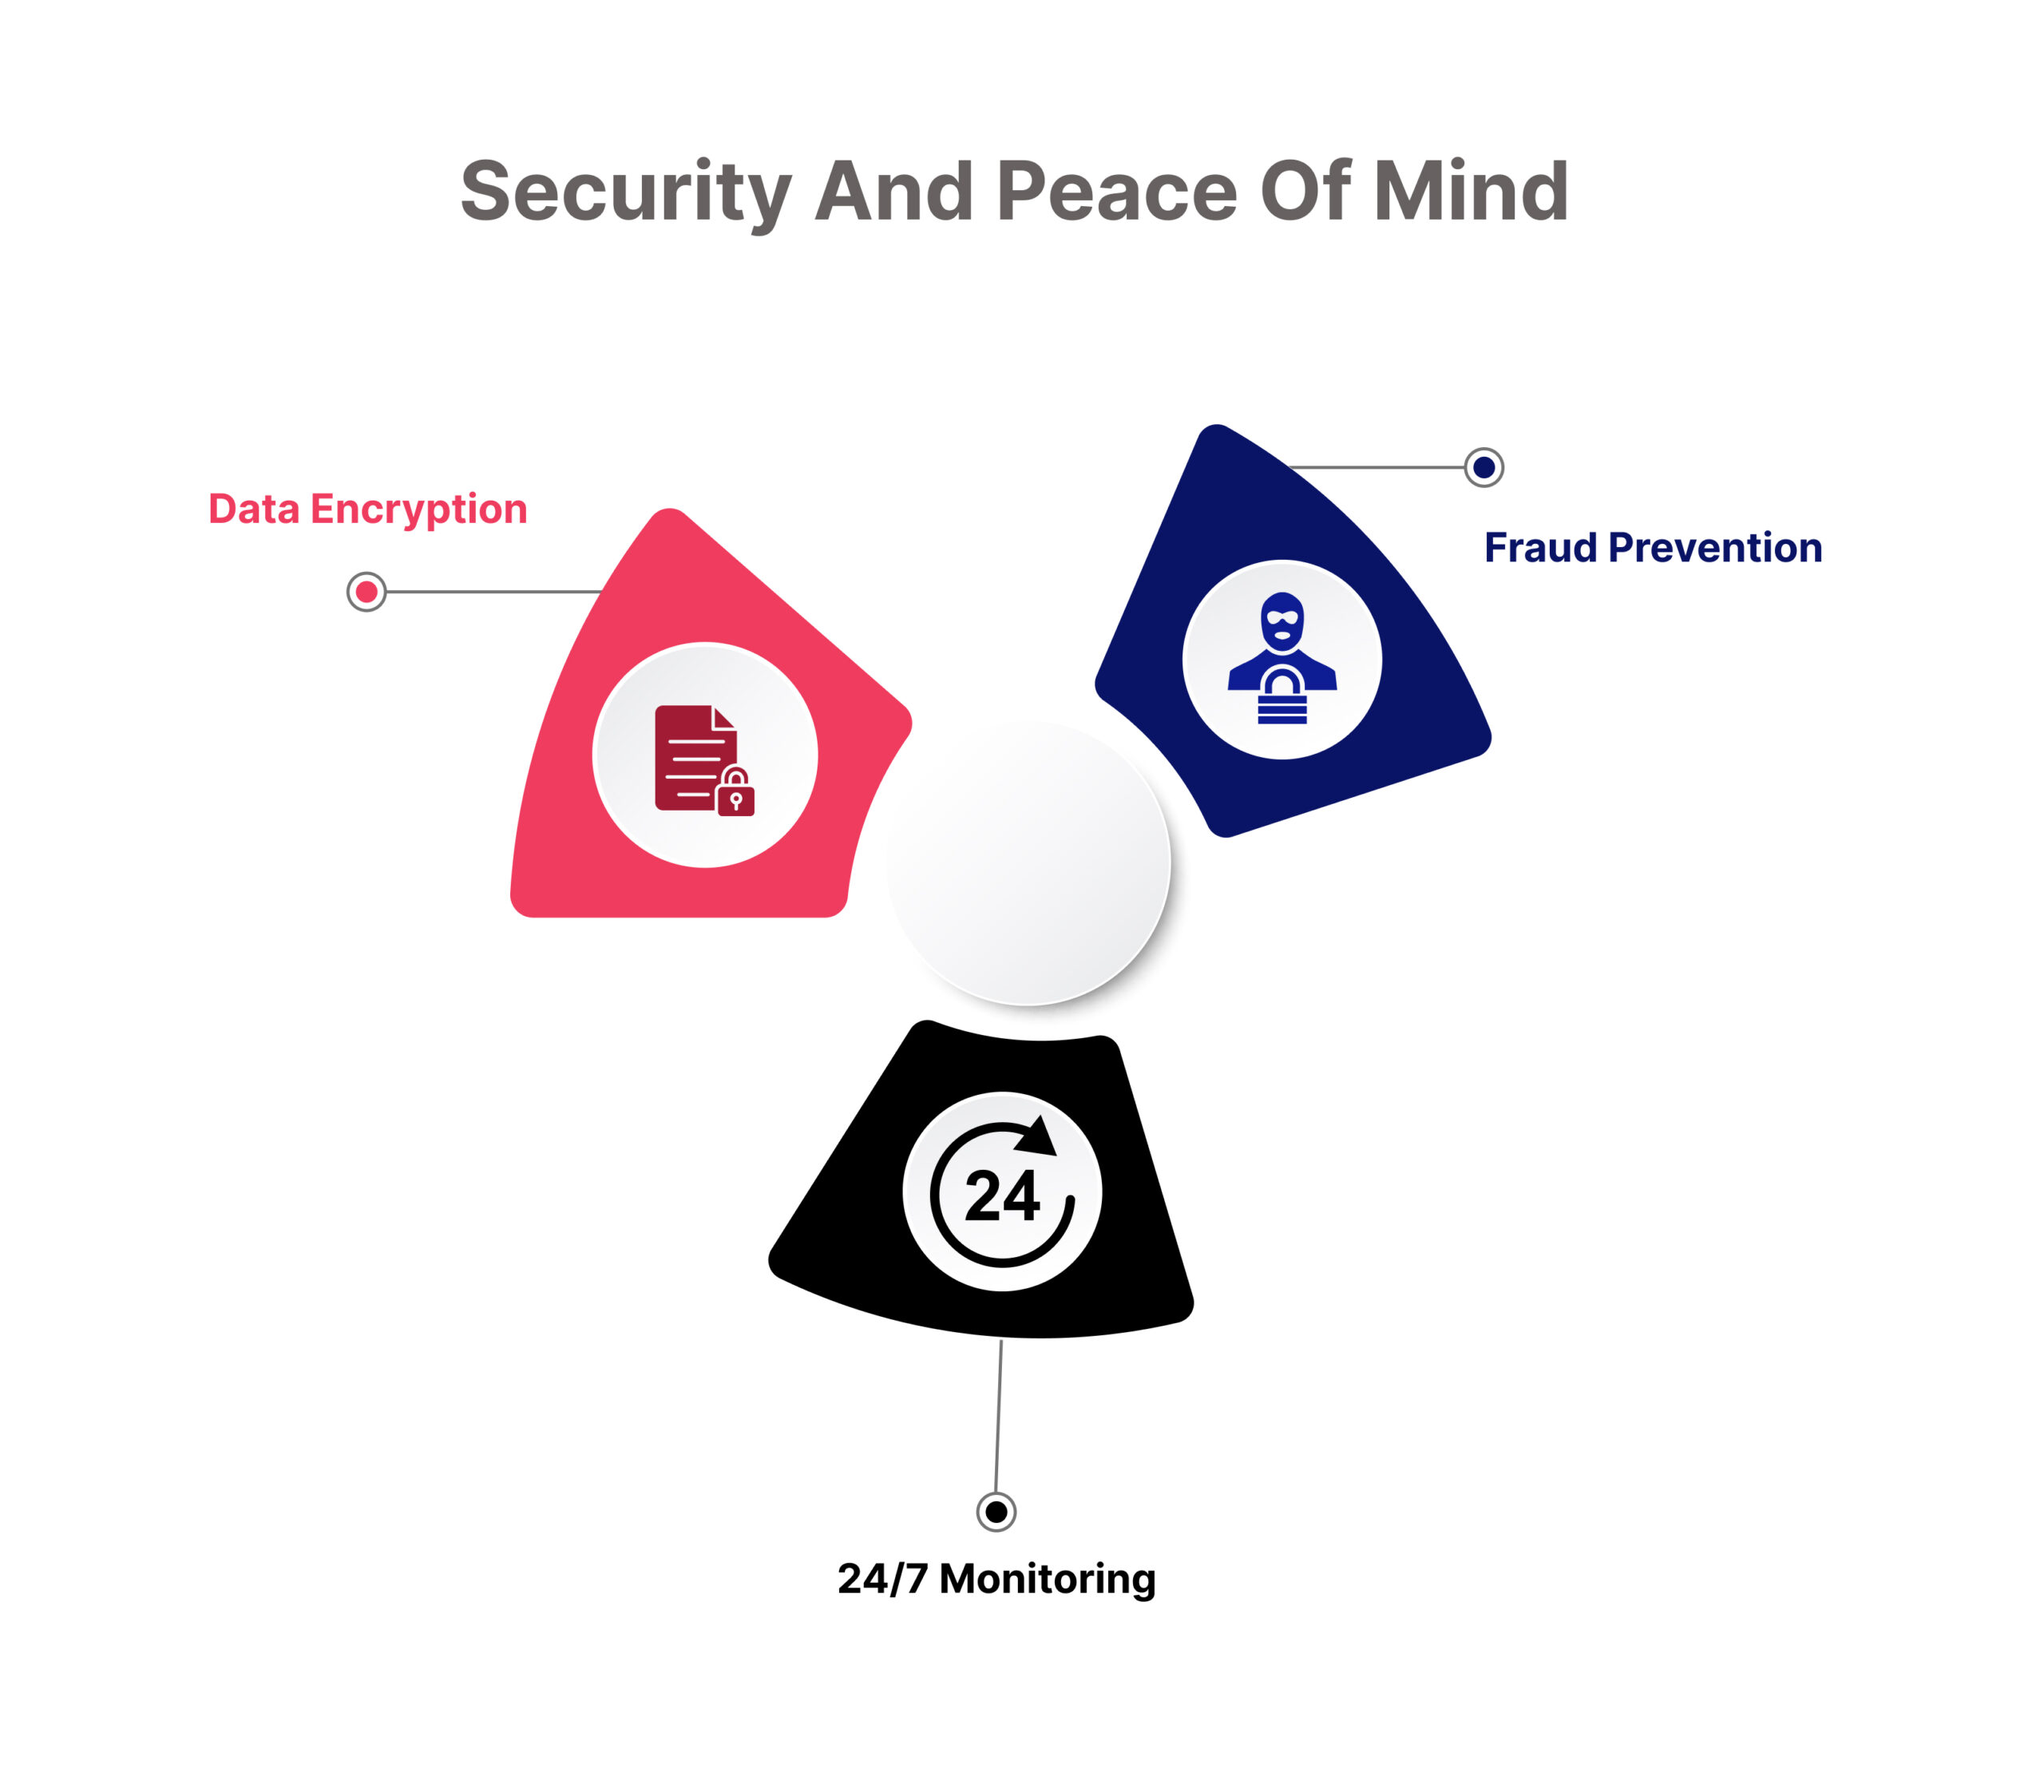 Security and Peace of Mind